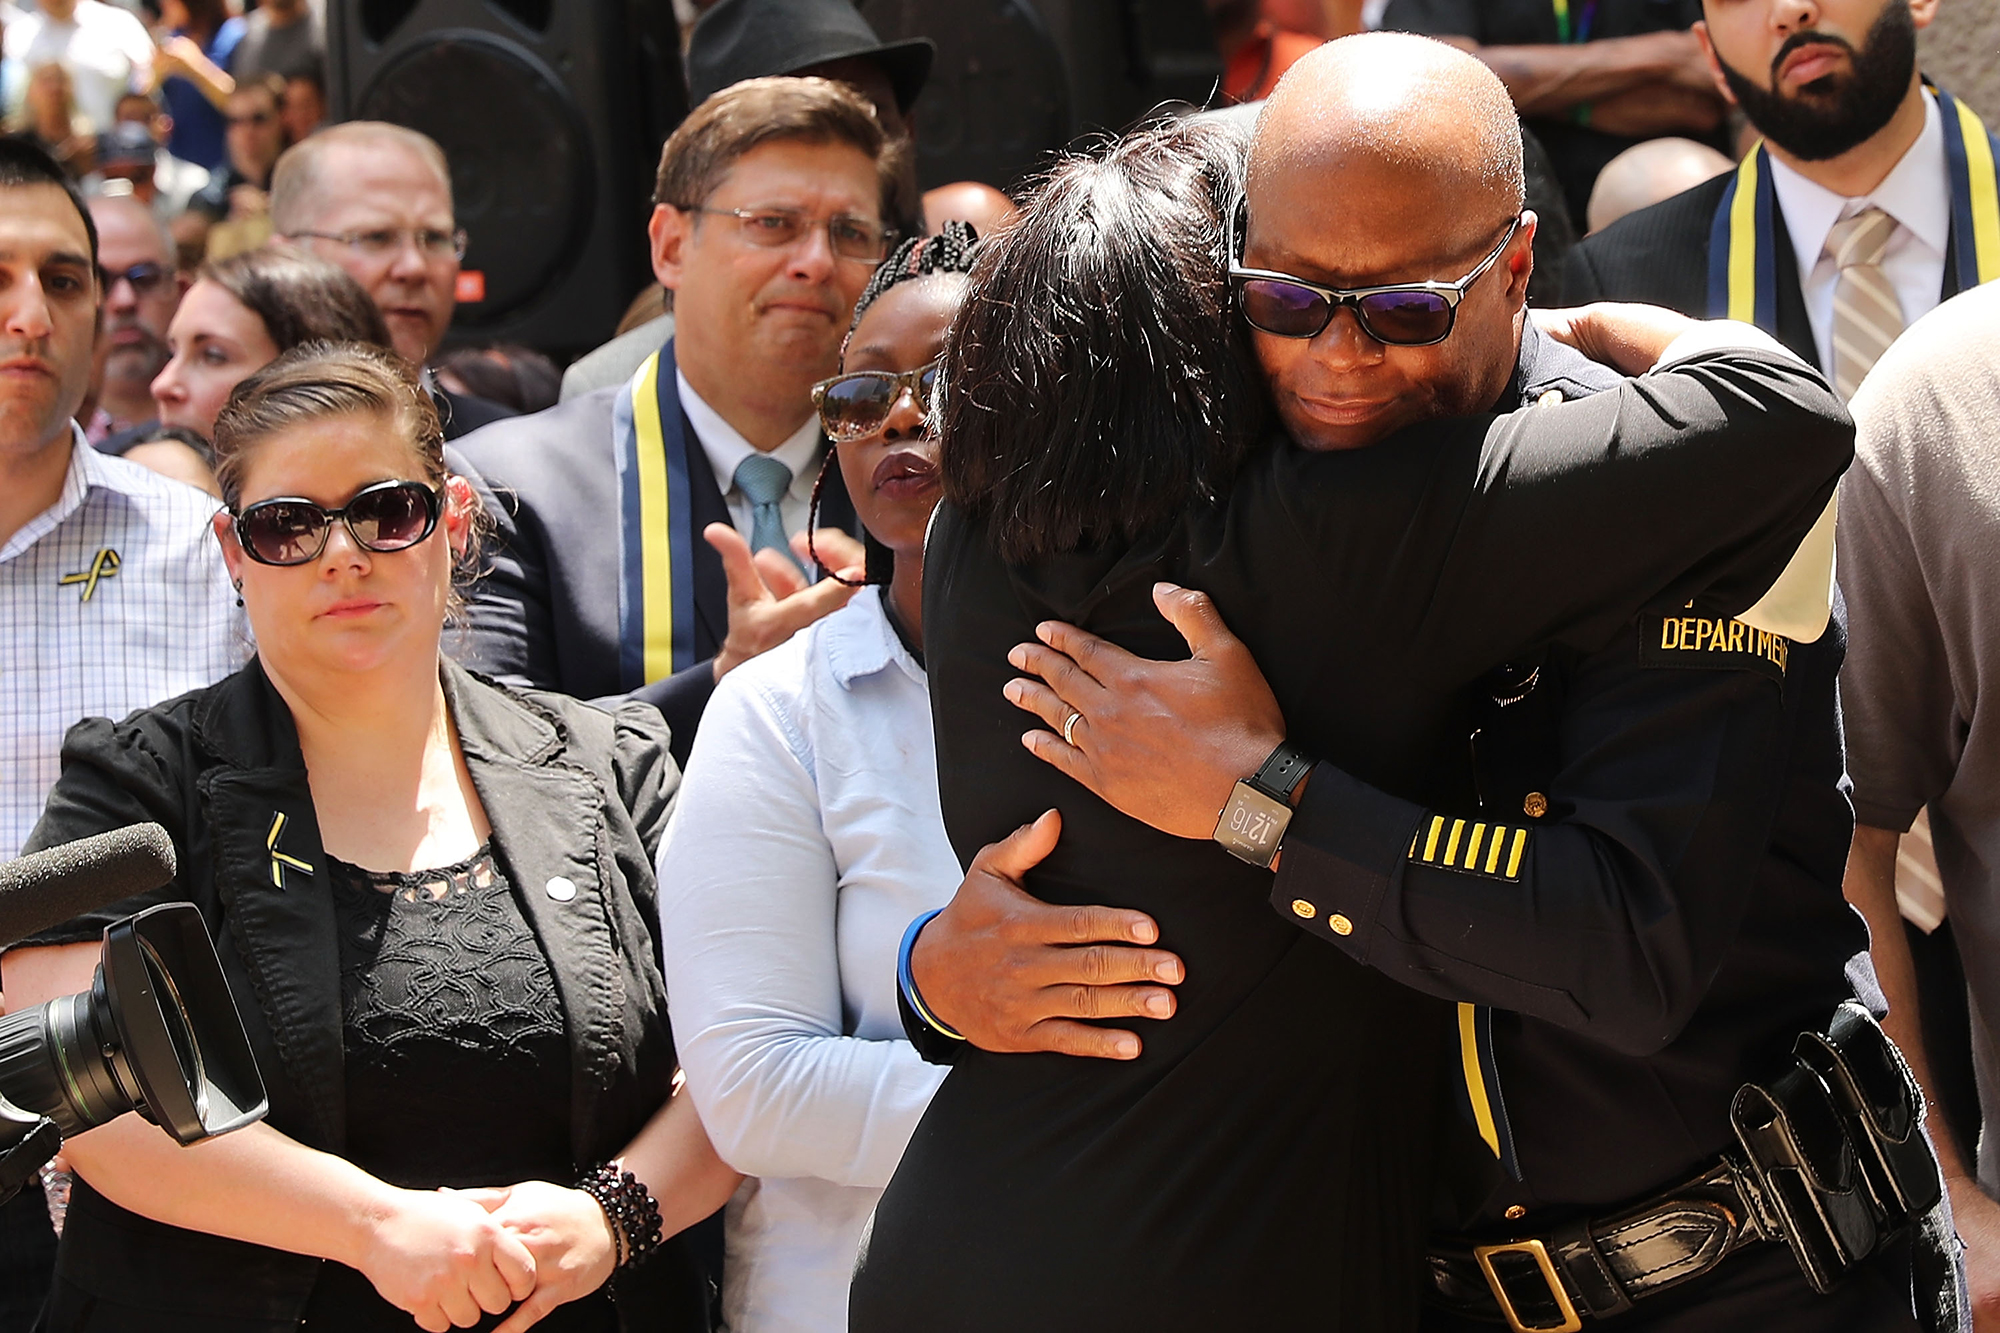 Dallas Police Chief David Brown is greeted with a hug at a prayer vigil following the deaths of five police officers in Dallas on July 8, 2016.